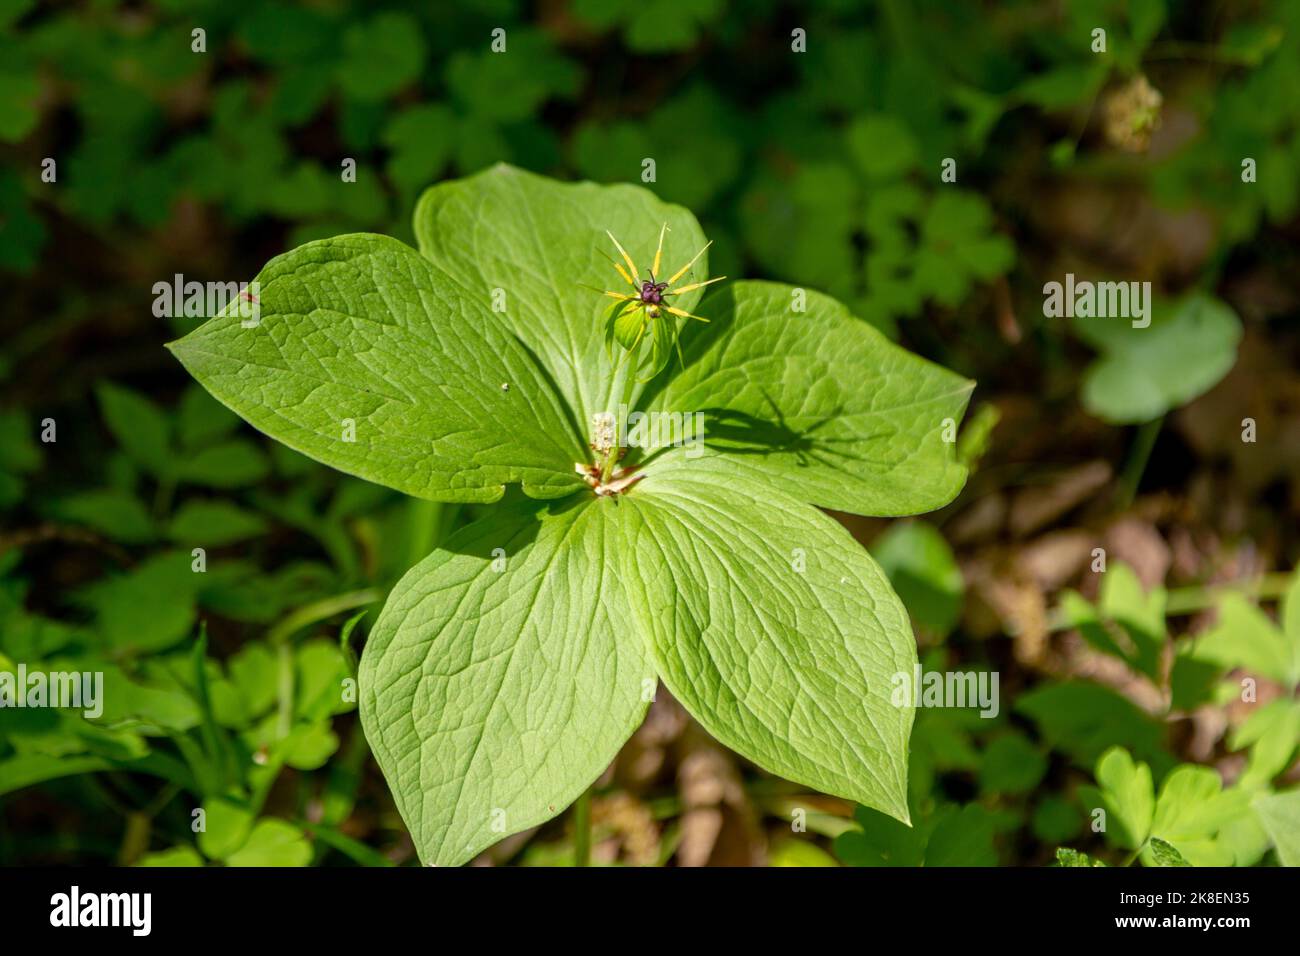 Paris quadrifolia or true lover's knot blooming plant growing in the forest. Stock Photo